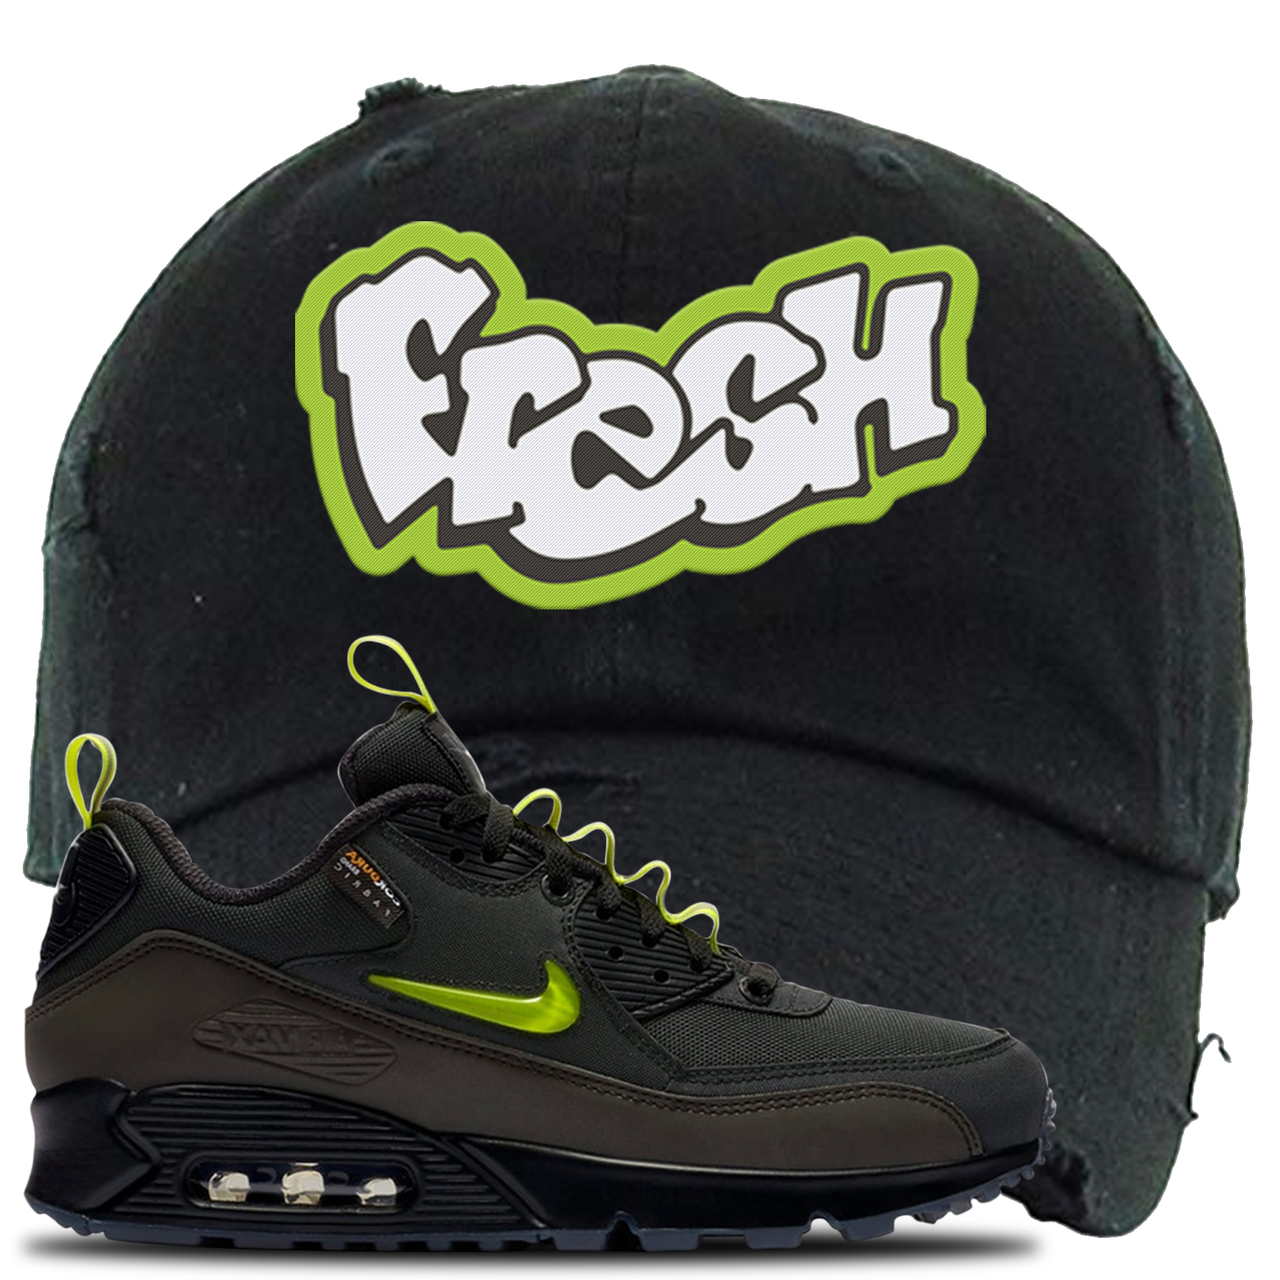 The Basement X Air Max 90 Manchester Fresh Black Sneaker Hook Up Distressed Dad Hat